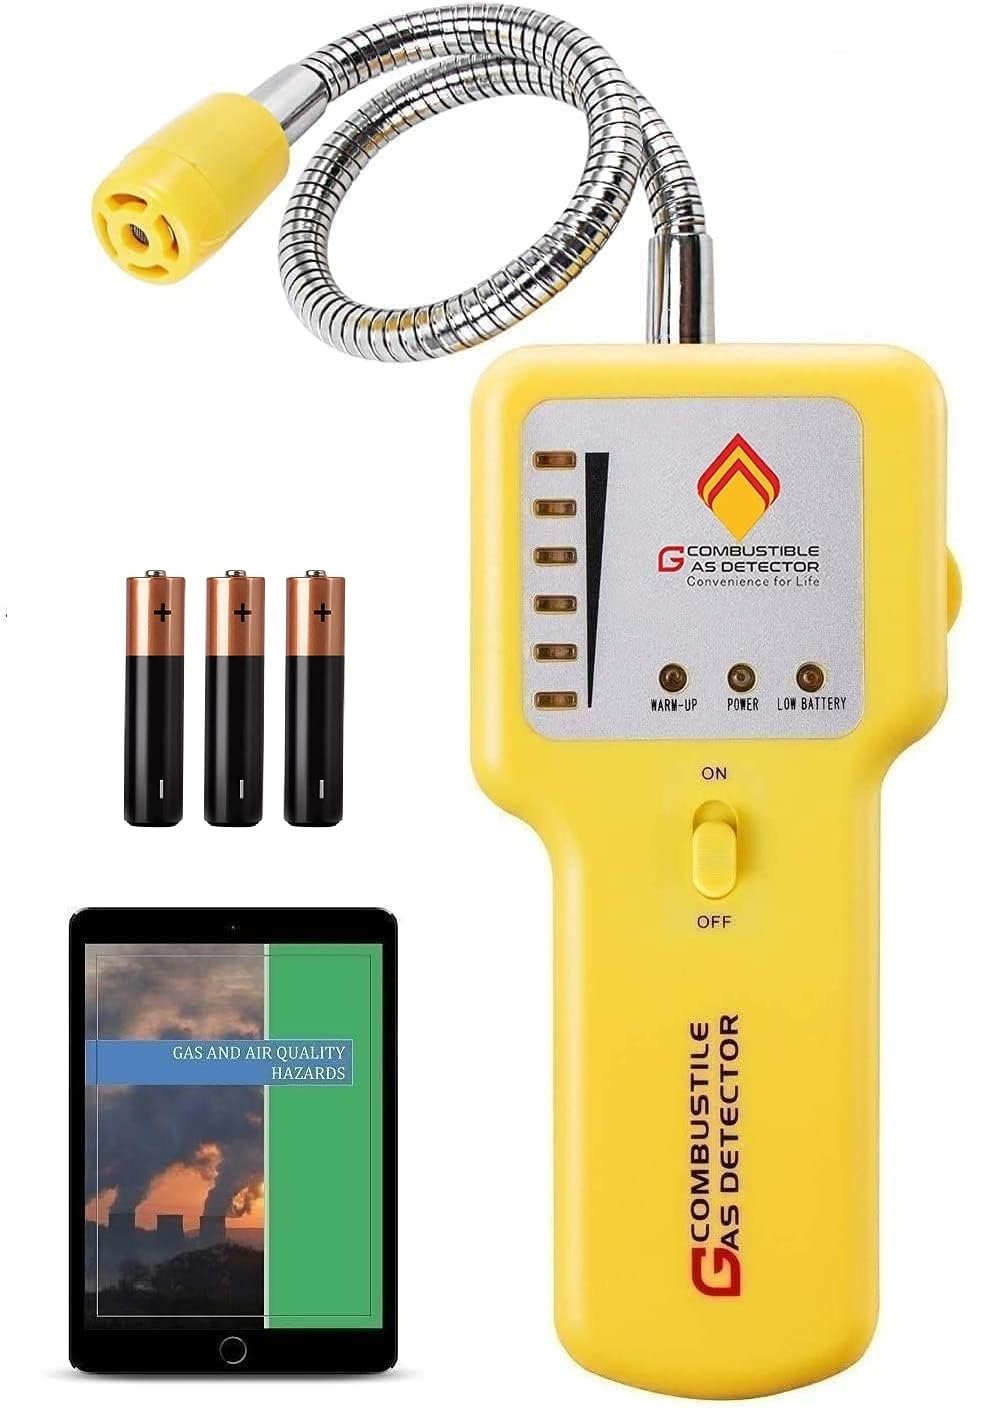 EG Gas Leak Detector & Natural Gas Detector: Portable Gas Sniffer to Locate Leaks of Multiple Combustible Gases Like Propane, Metha